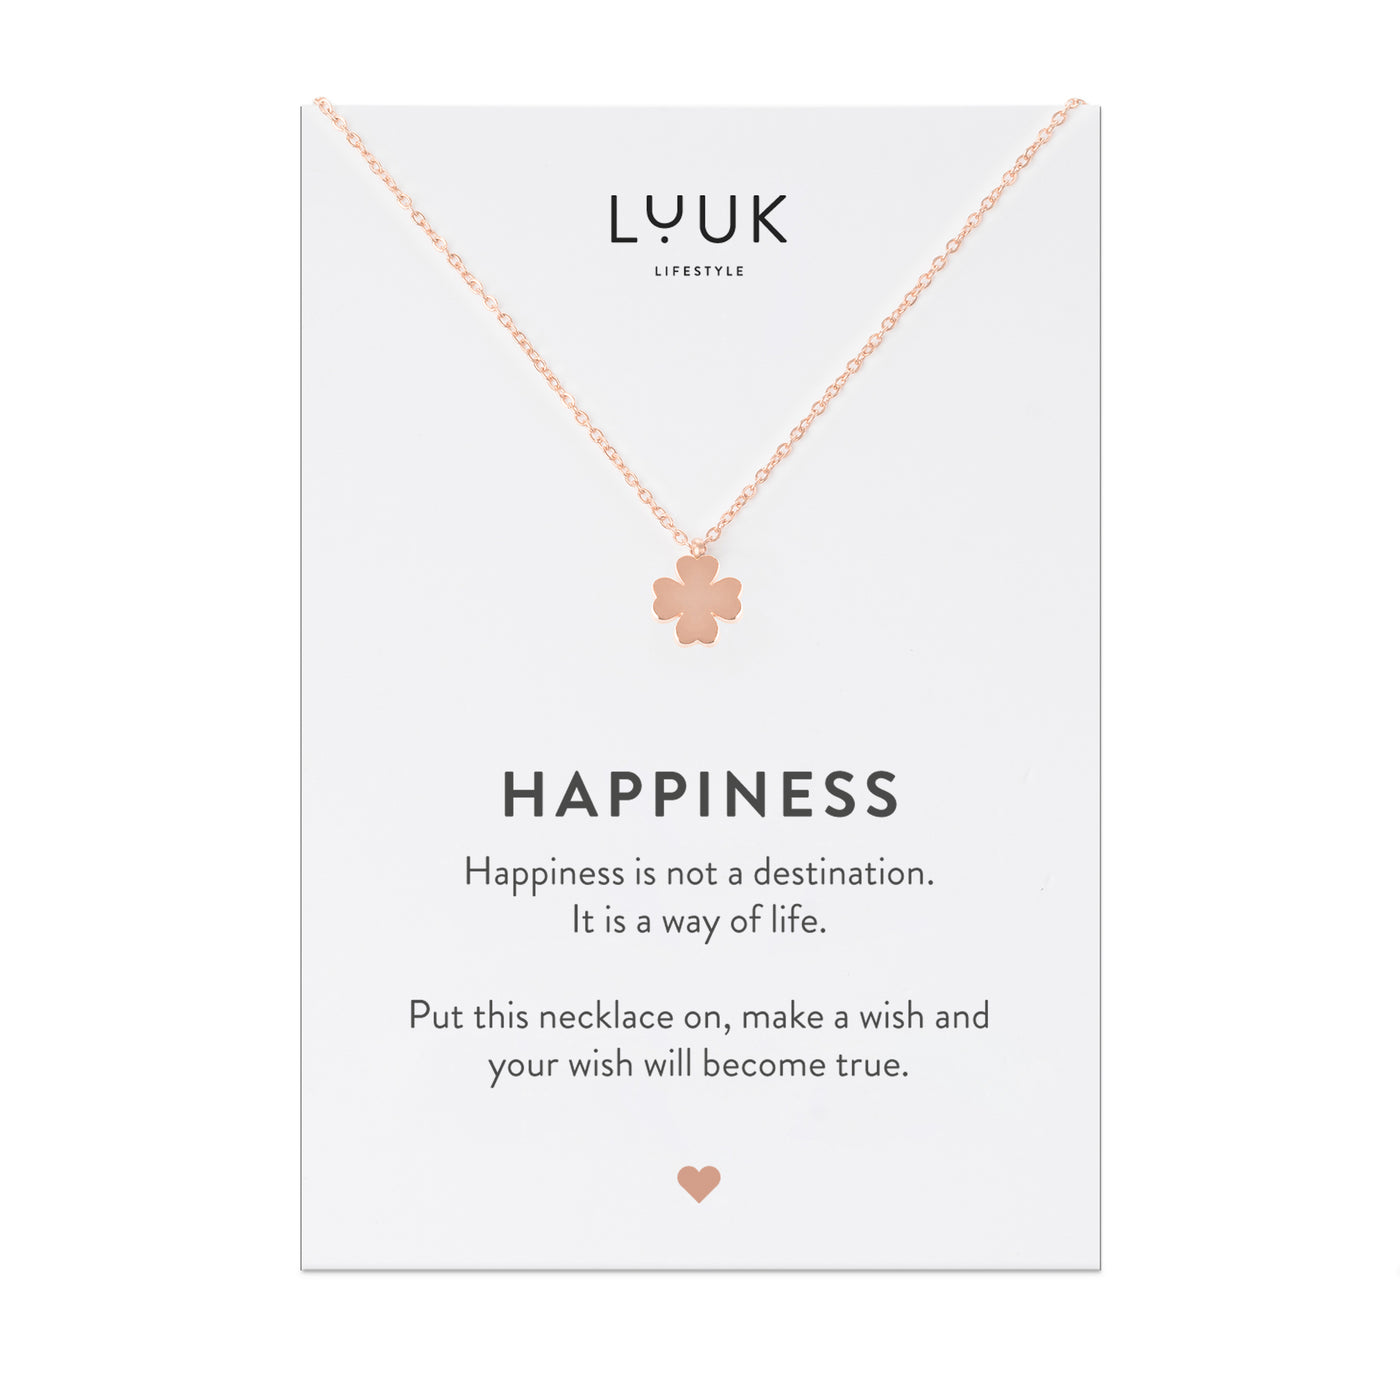 Necklace with clover leaf pendant and Happiness greeting card